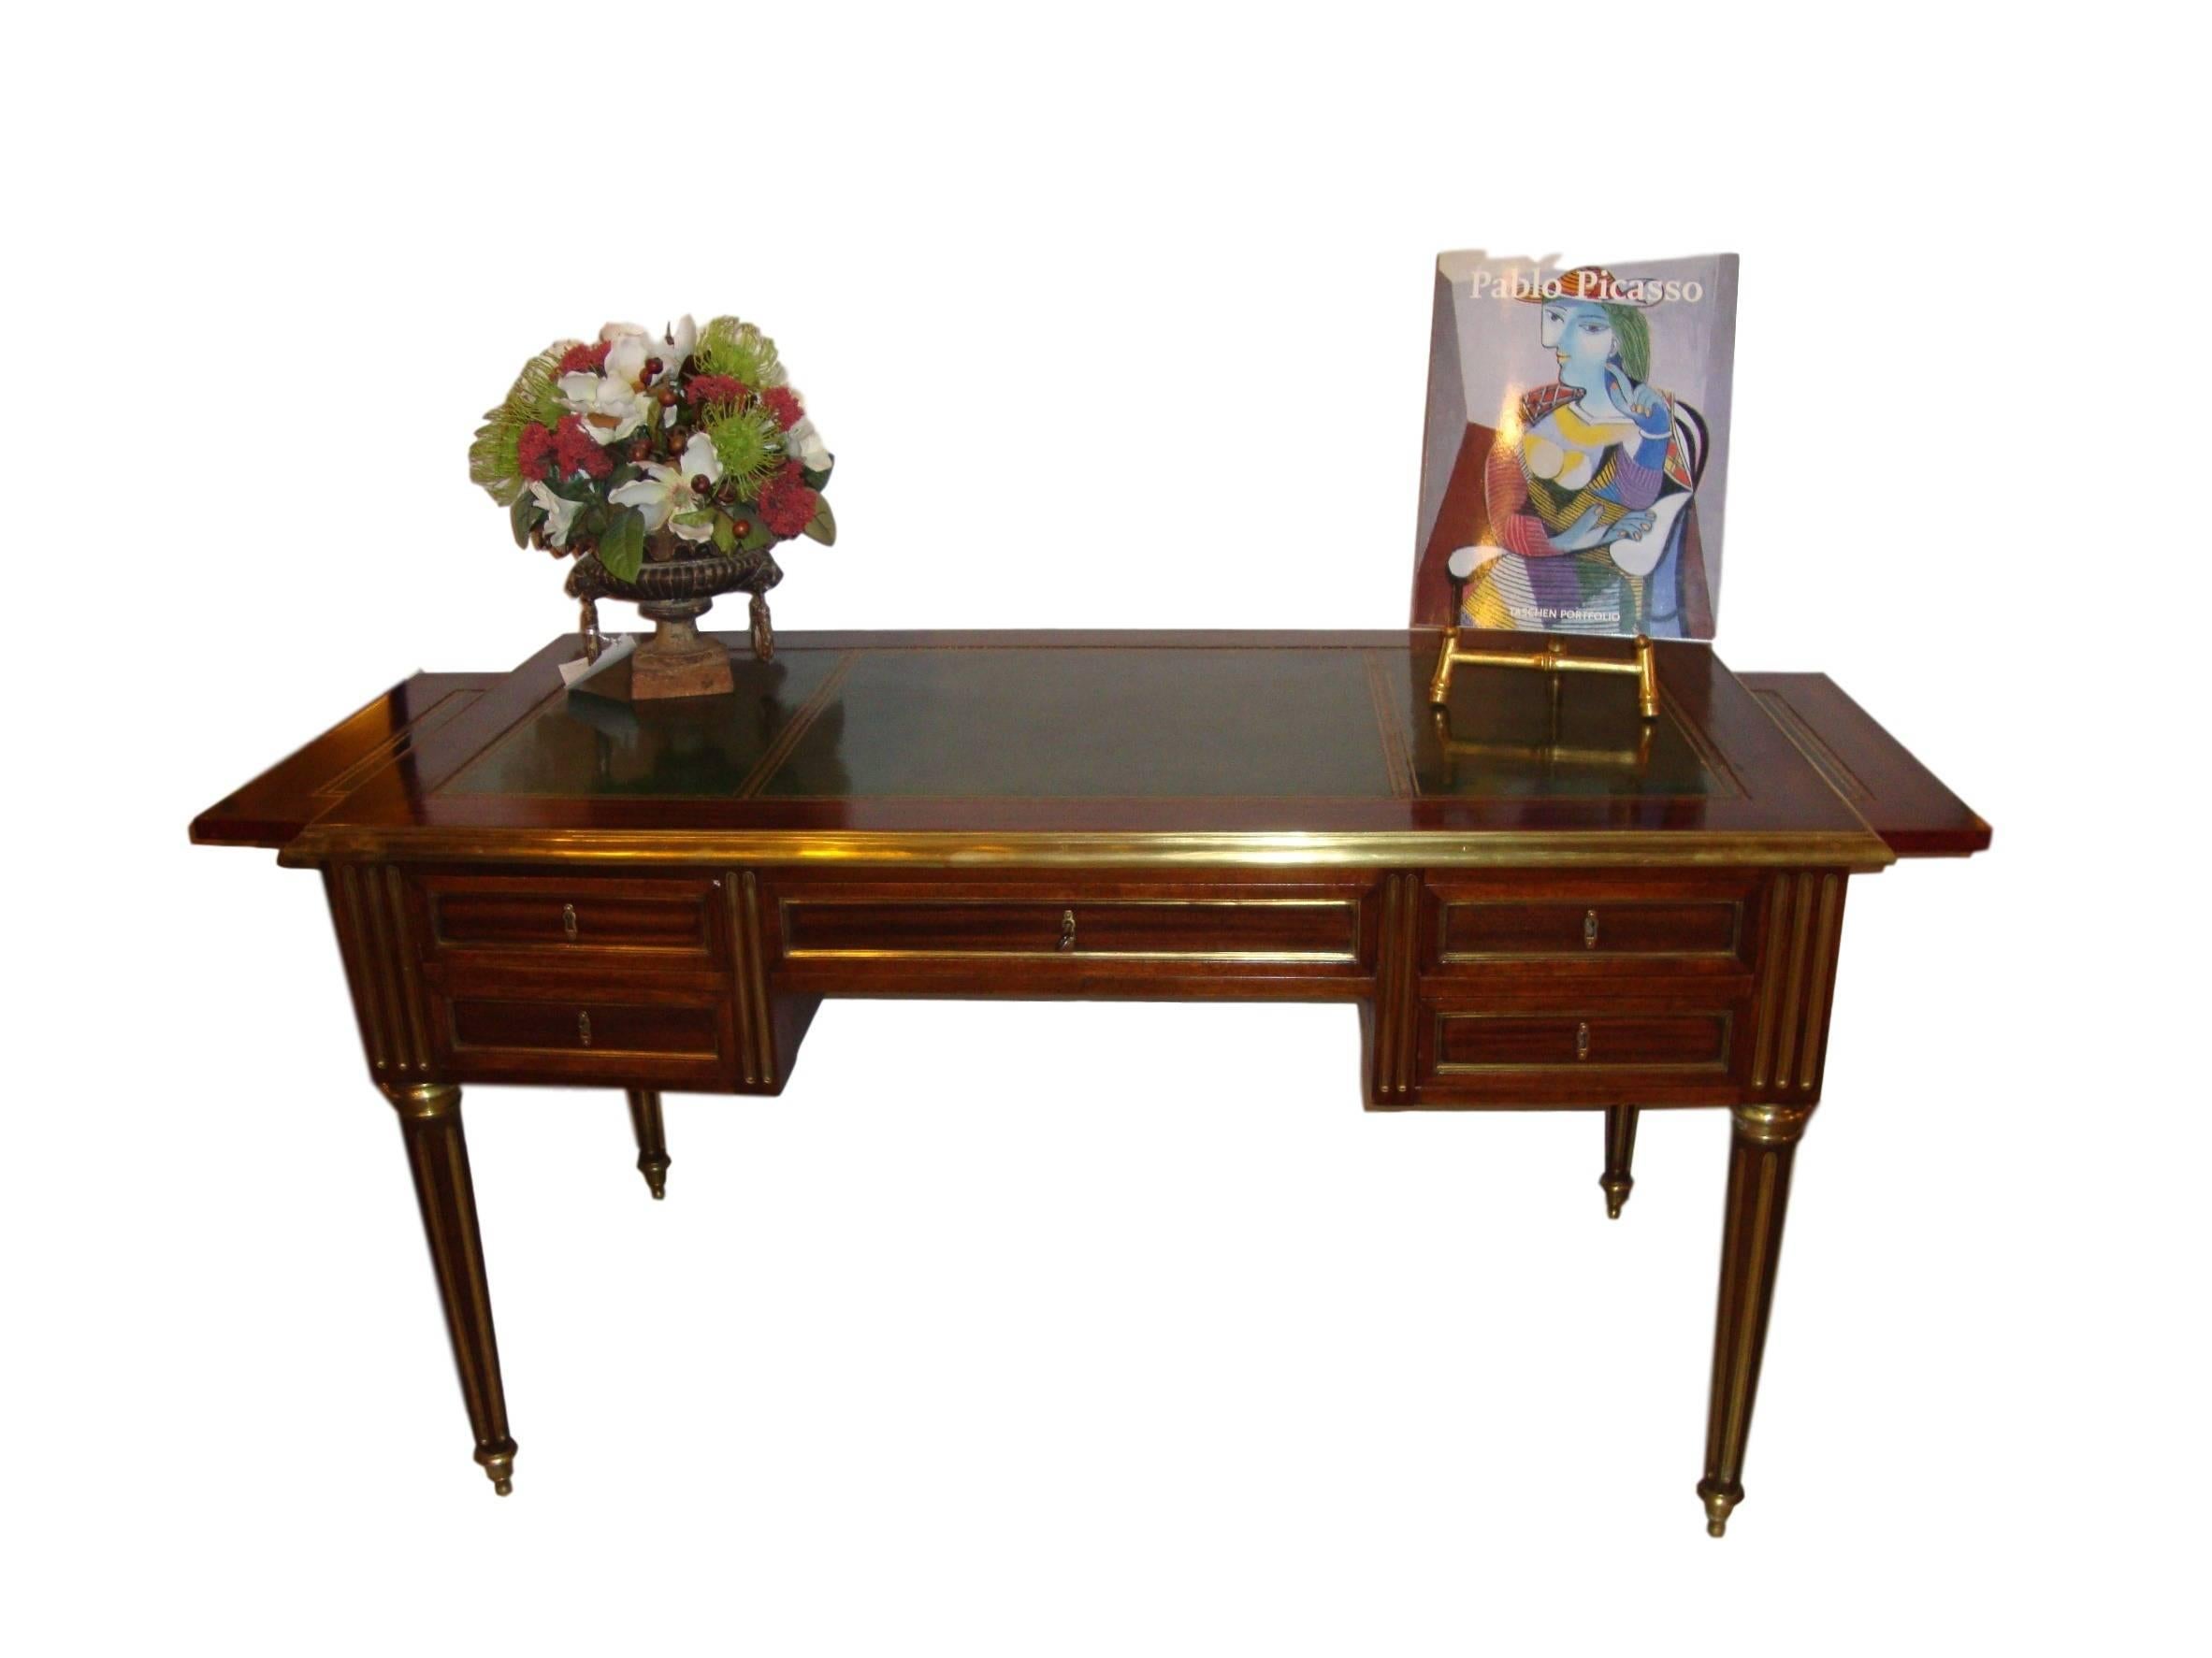 French Louis XVI style bureauplat finely bronze mounted. This fine custom quality bronze-mounted desk is fashioned in the Maison Jansen style. The center drawer flanked by a pair of smaller drawers all bronze framed. The sides also bronze framed